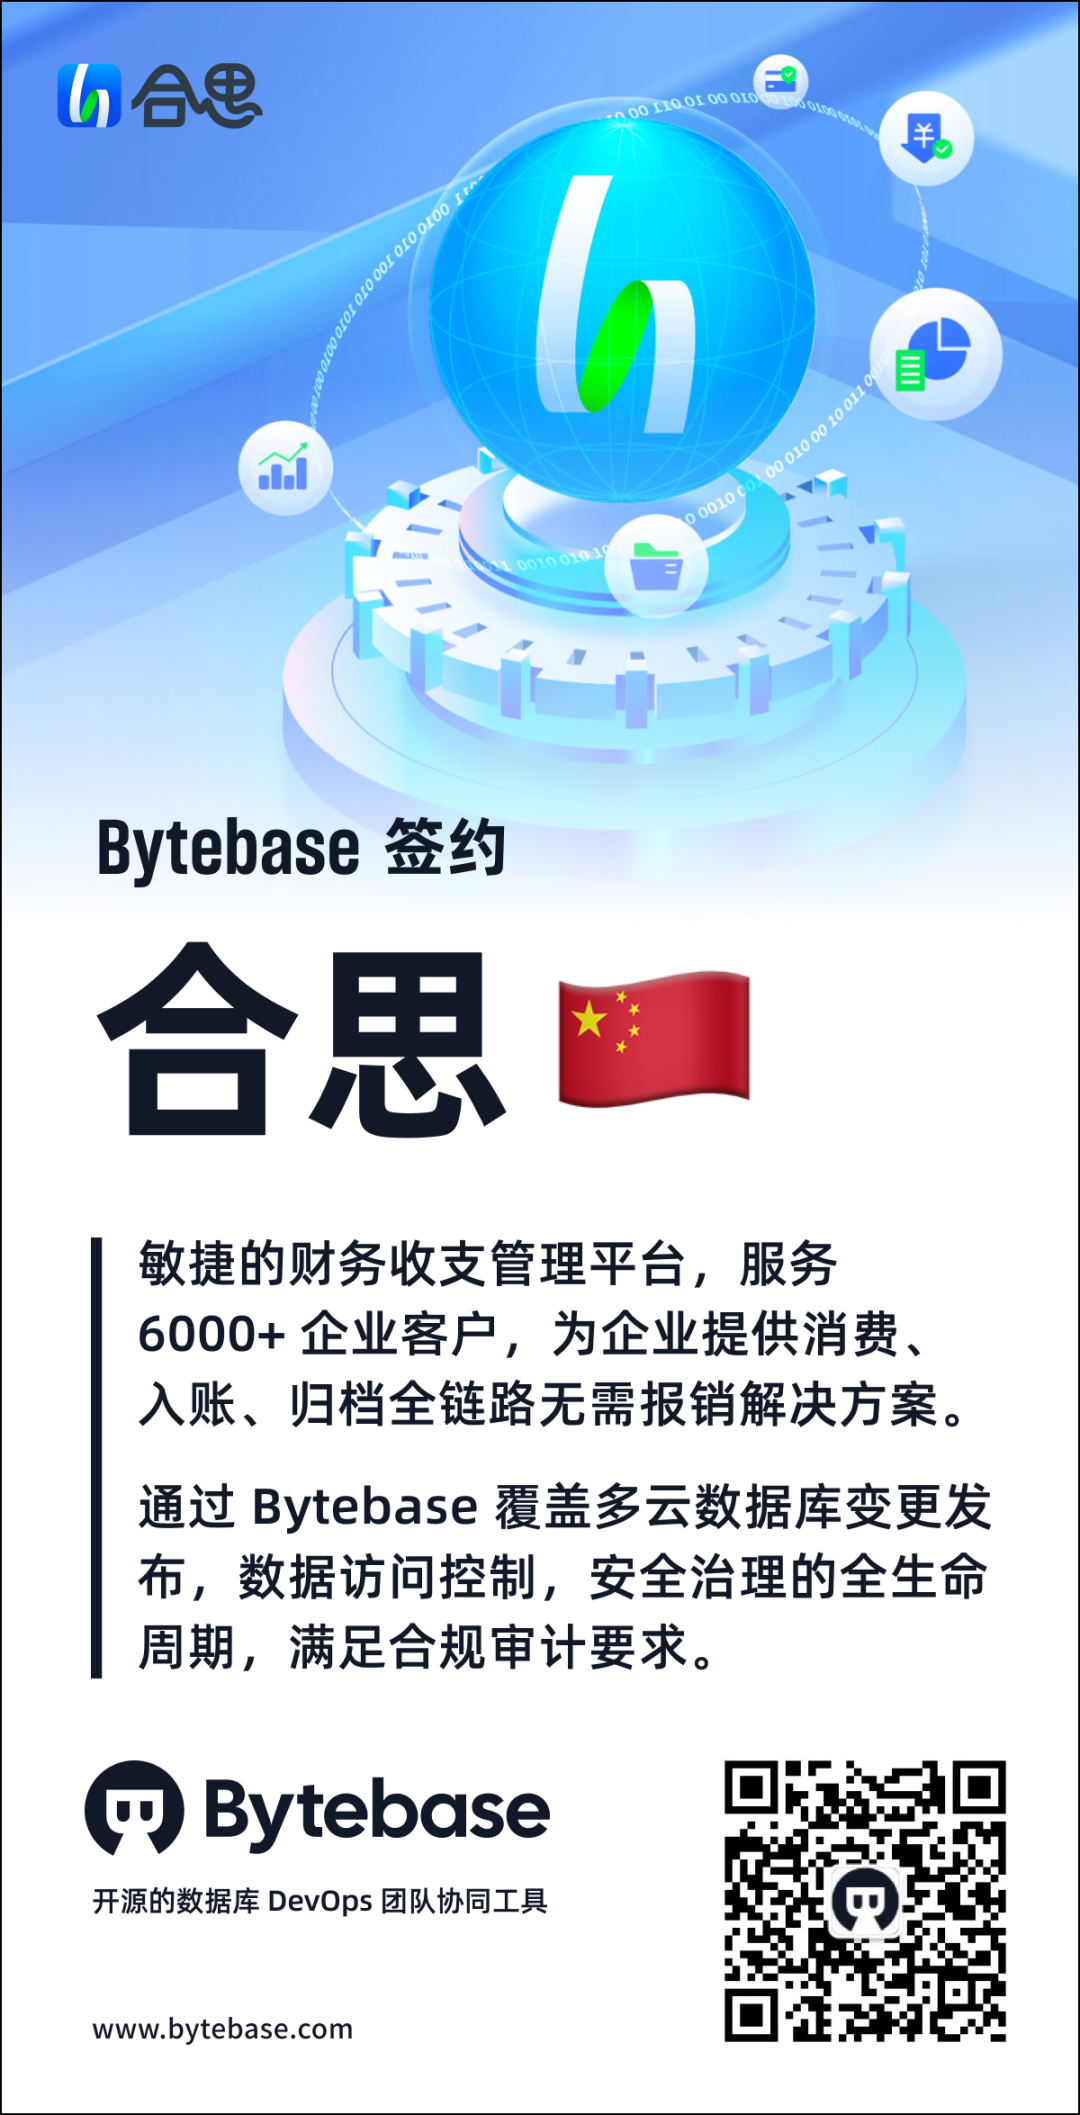 Bytebase 签约<span style='color:red;'>合</span>思，覆盖多<span style='color:red;'>云</span><span style='color:red;'>数据库</span>变更发布，<span style='color:red;'>数据</span>访问控制，<span style='color:red;'>安全</span>治理的<span style='color:red;'>全</span>生命周期，确保符合<span style='color:red;'>合</span><span style='color:red;'>规</span>审计要求